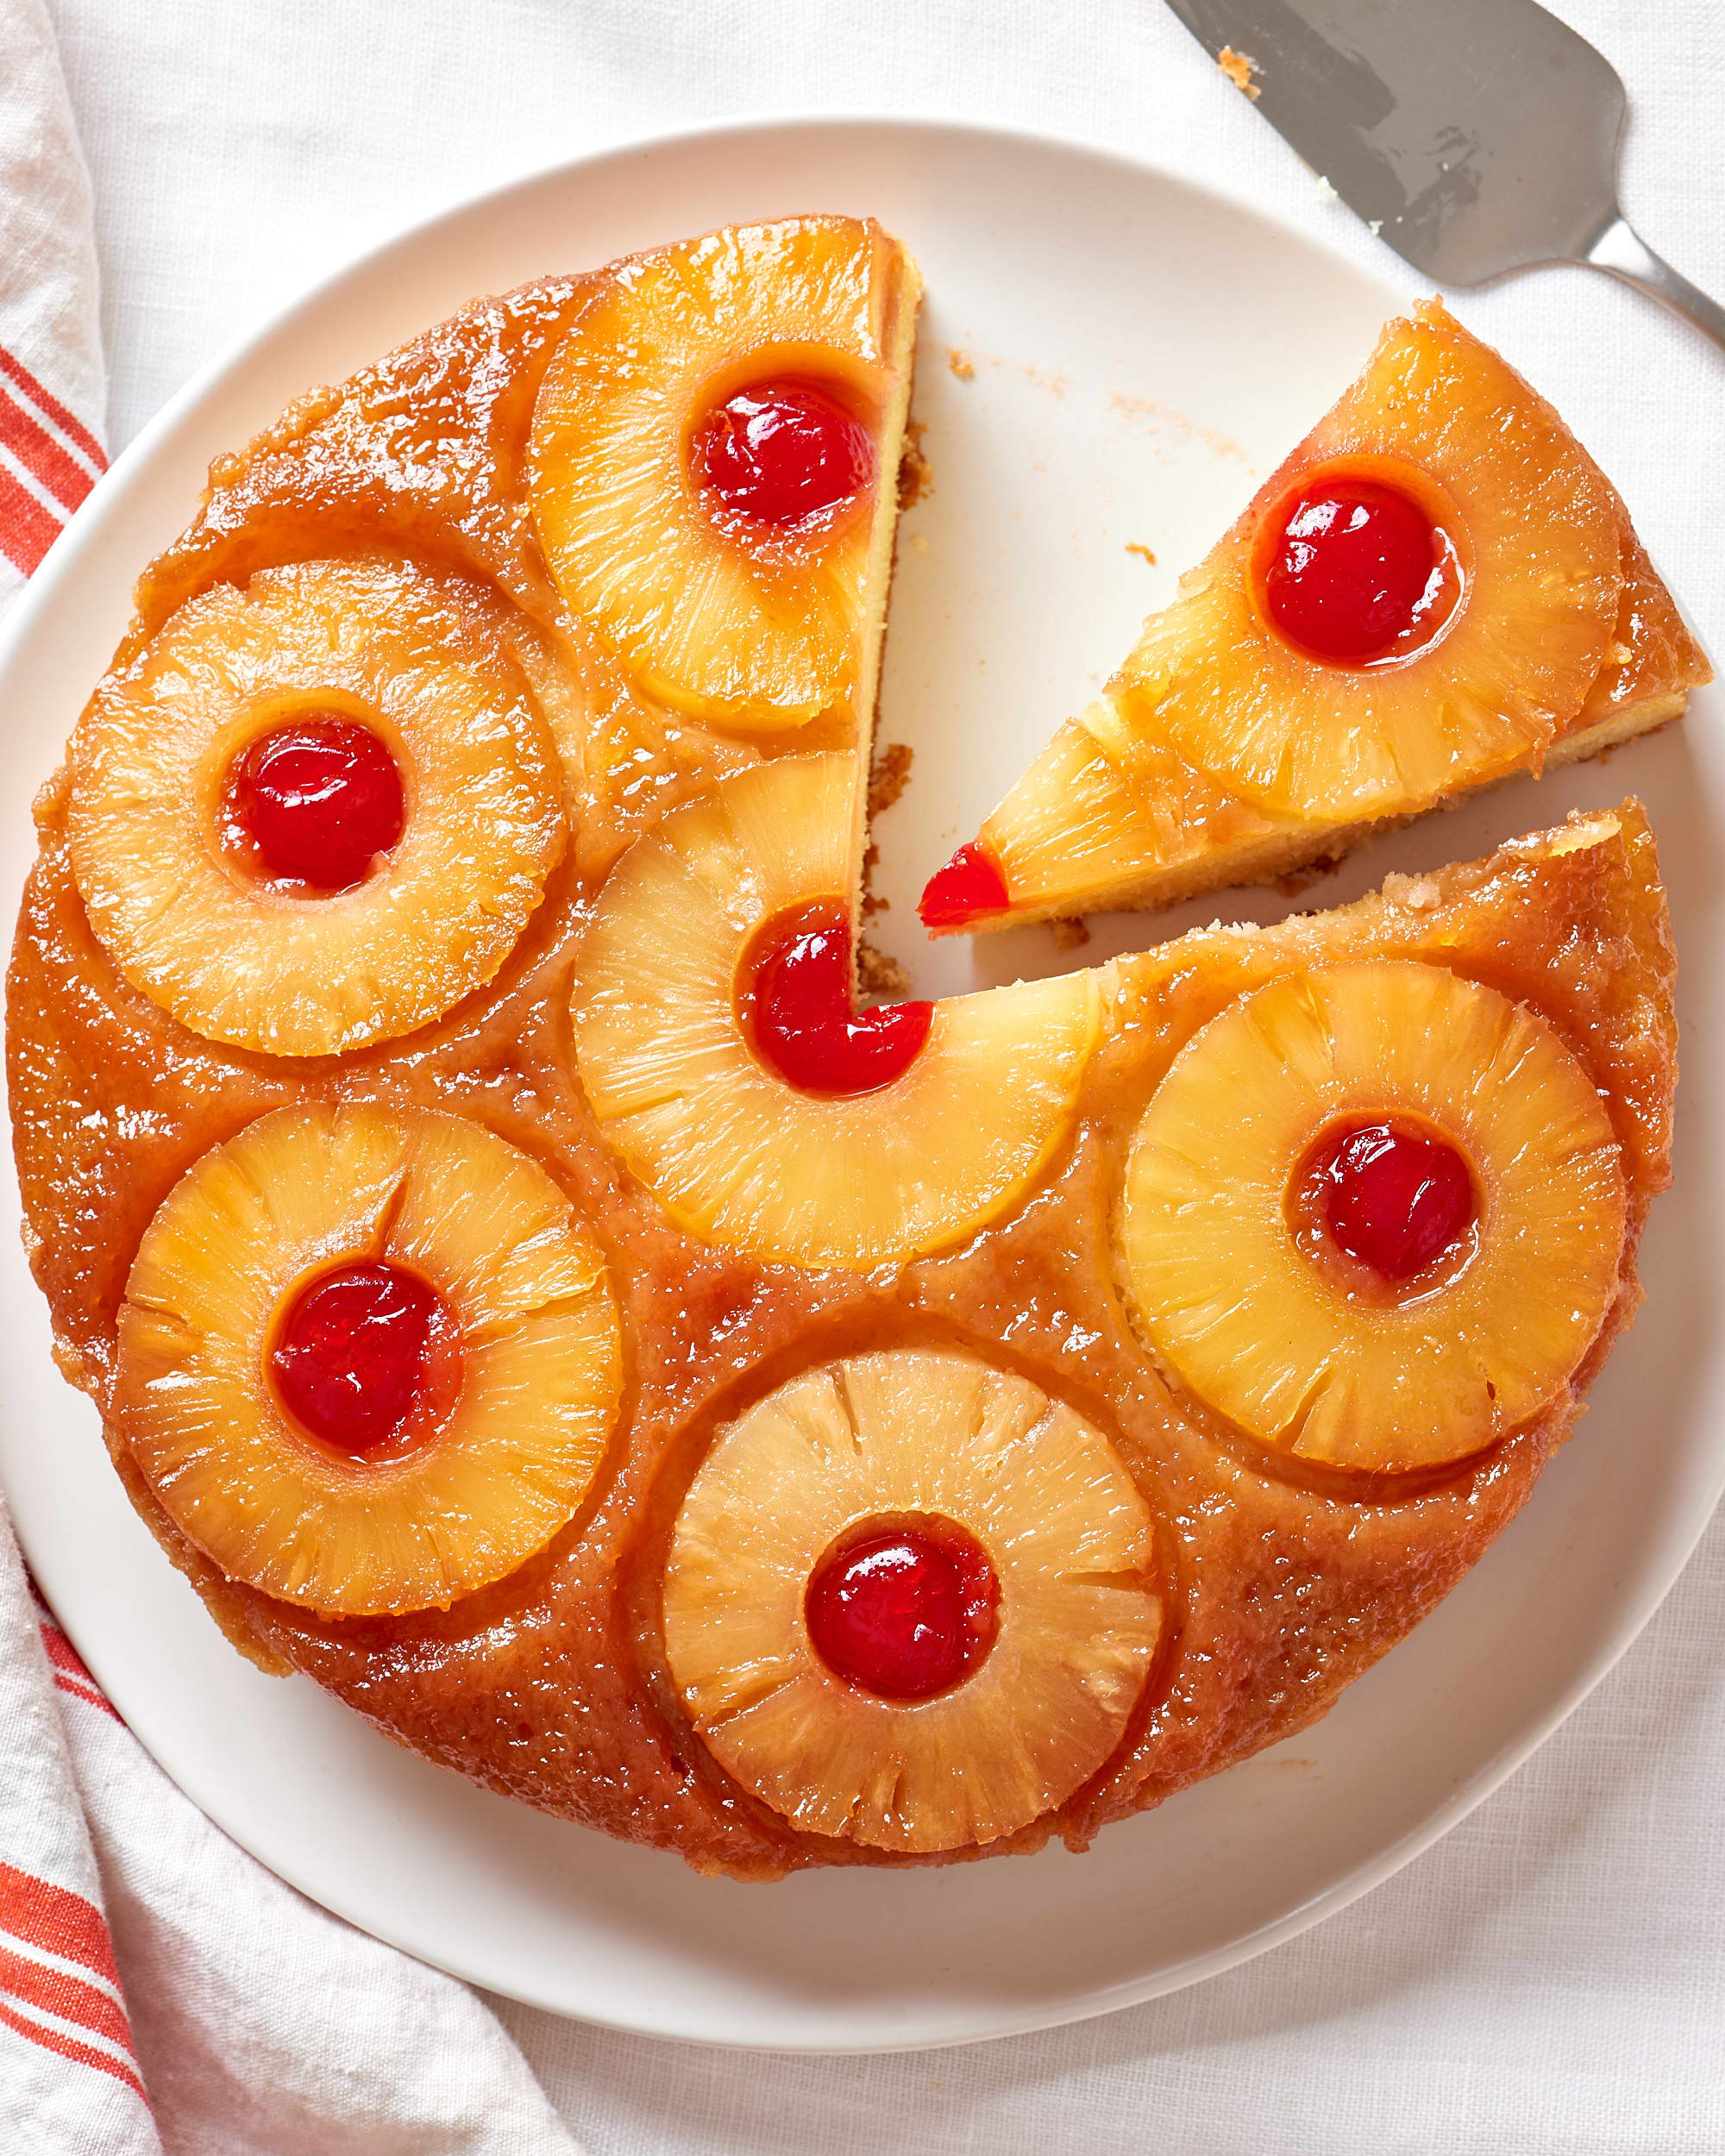 Recipe for pineapple upside down cake using a cake mix How To Make Easy Pineapple Upside Down Cake From Scratch Kitchn